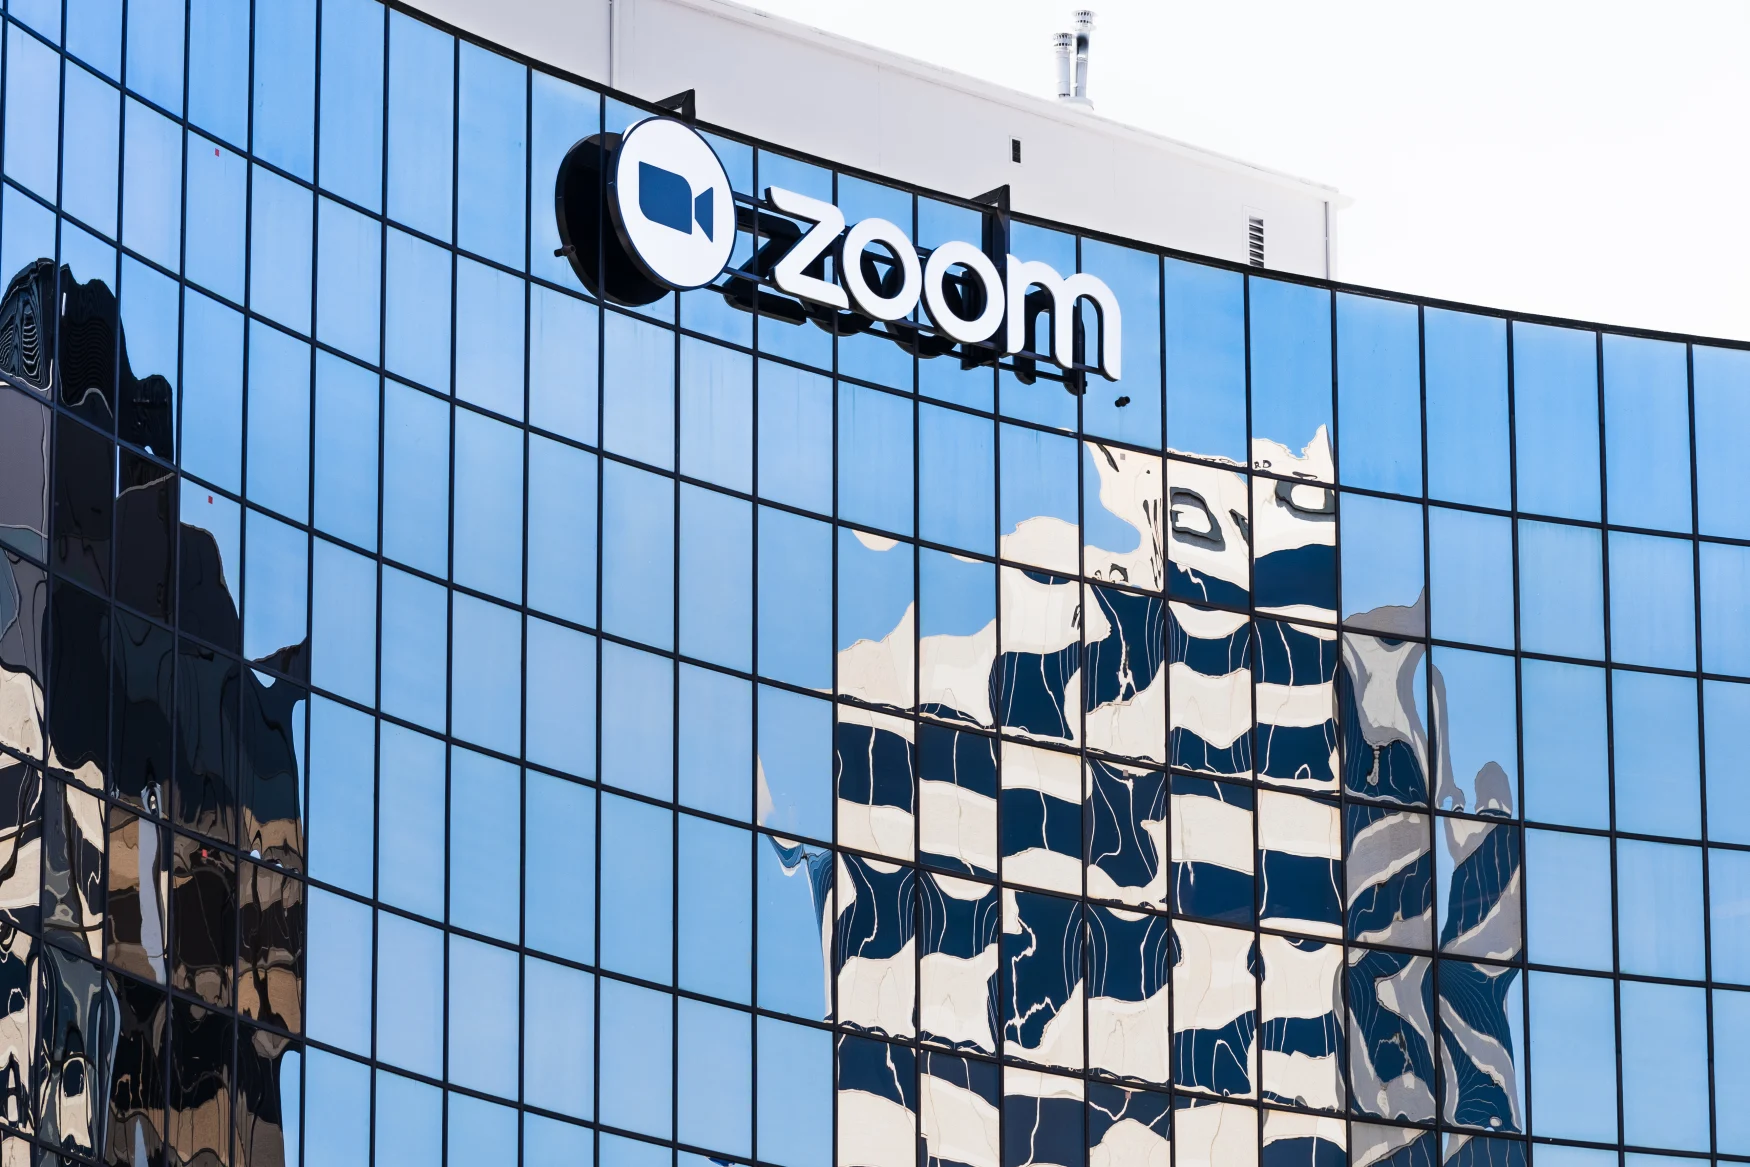 May 6, 2020 San Jose / CA / USA - Zoom headquarters in Silicon Valley; Zoom Video Communications is a company that provides remote conferencing services using cloud computing